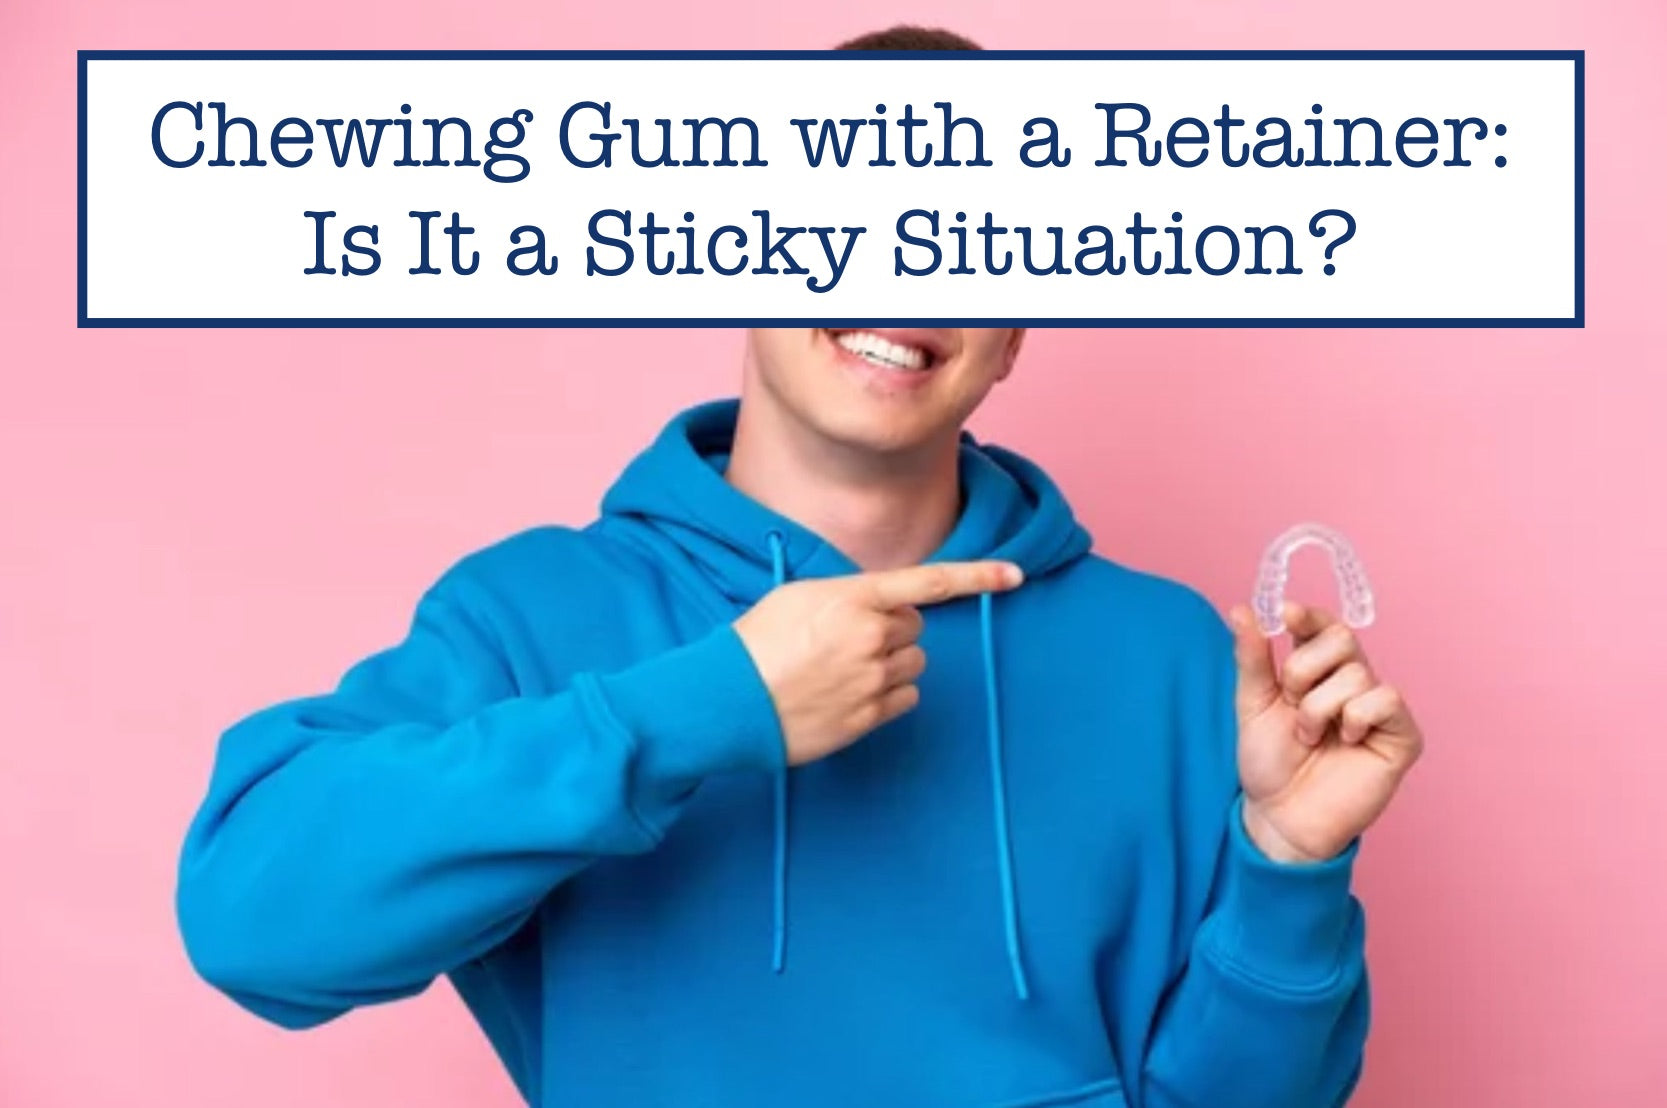 Chewing Gum with a Retainer: Is It a Sticky Situation?